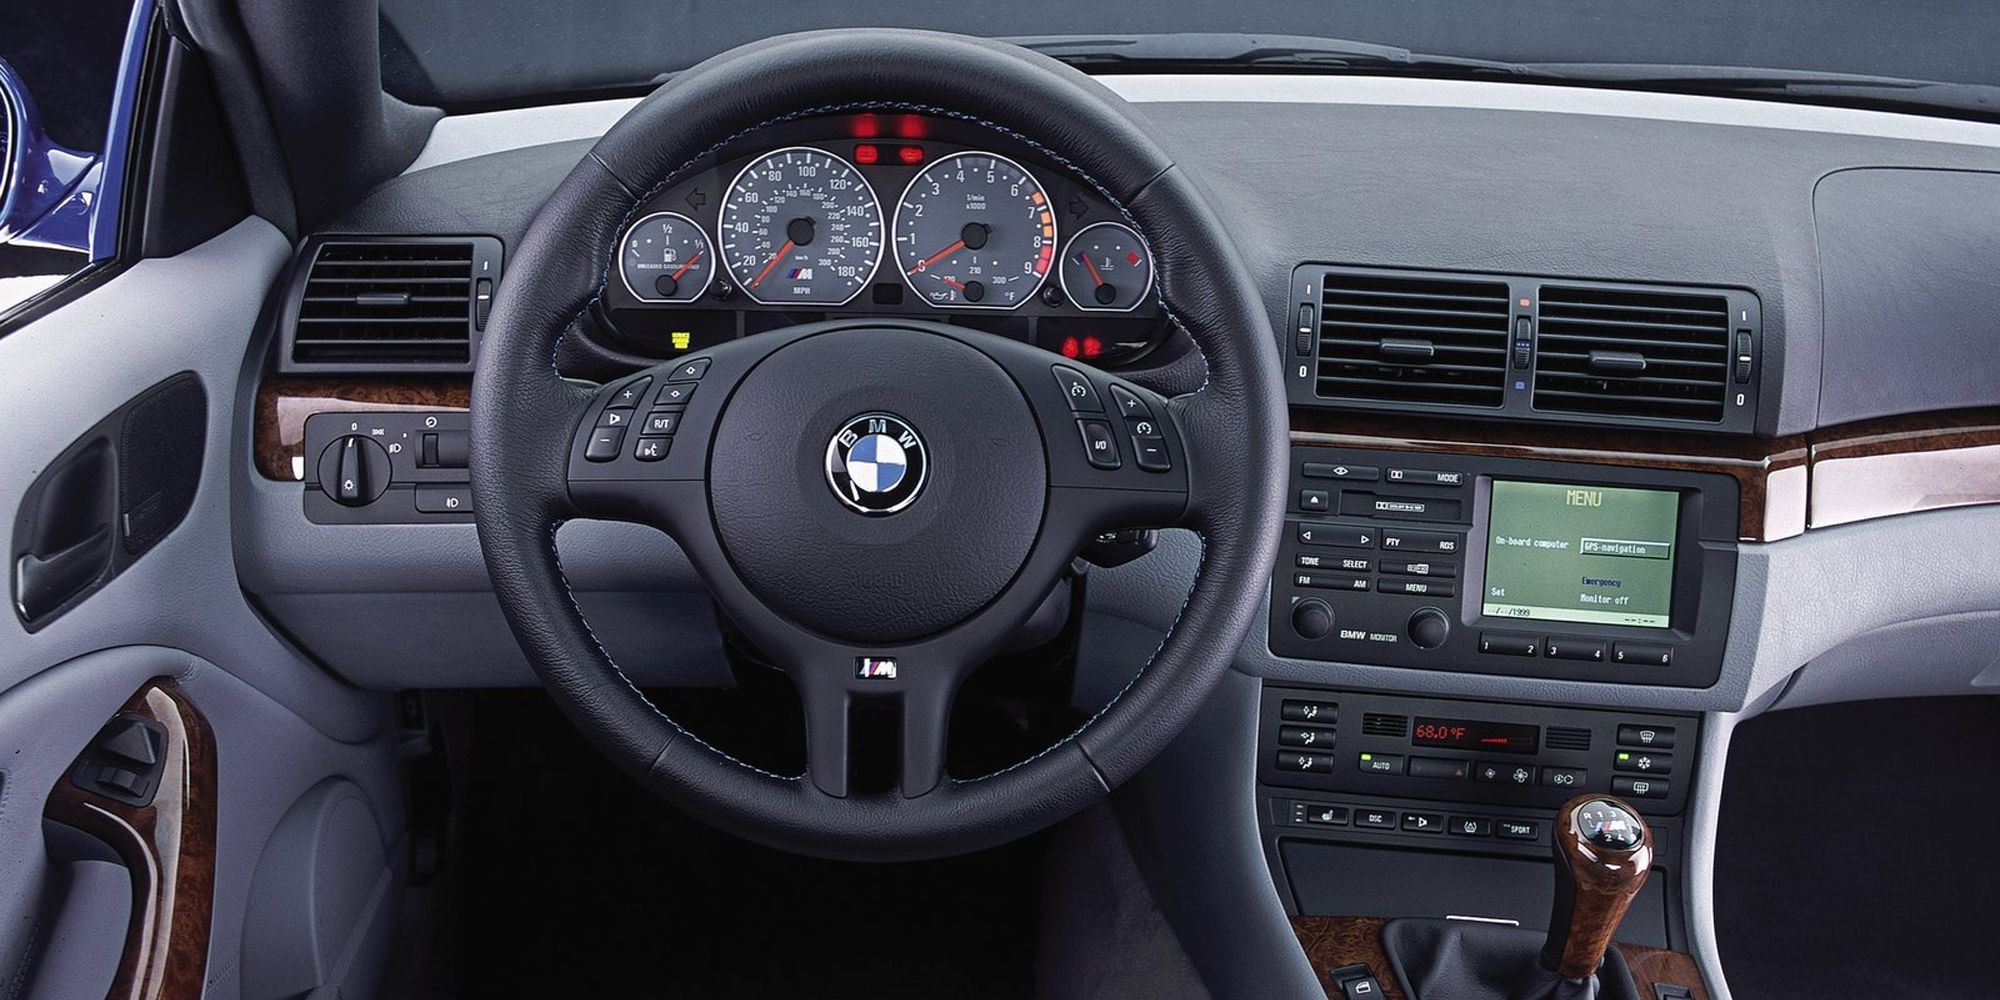 The E46 M3's interior, behind the wheel